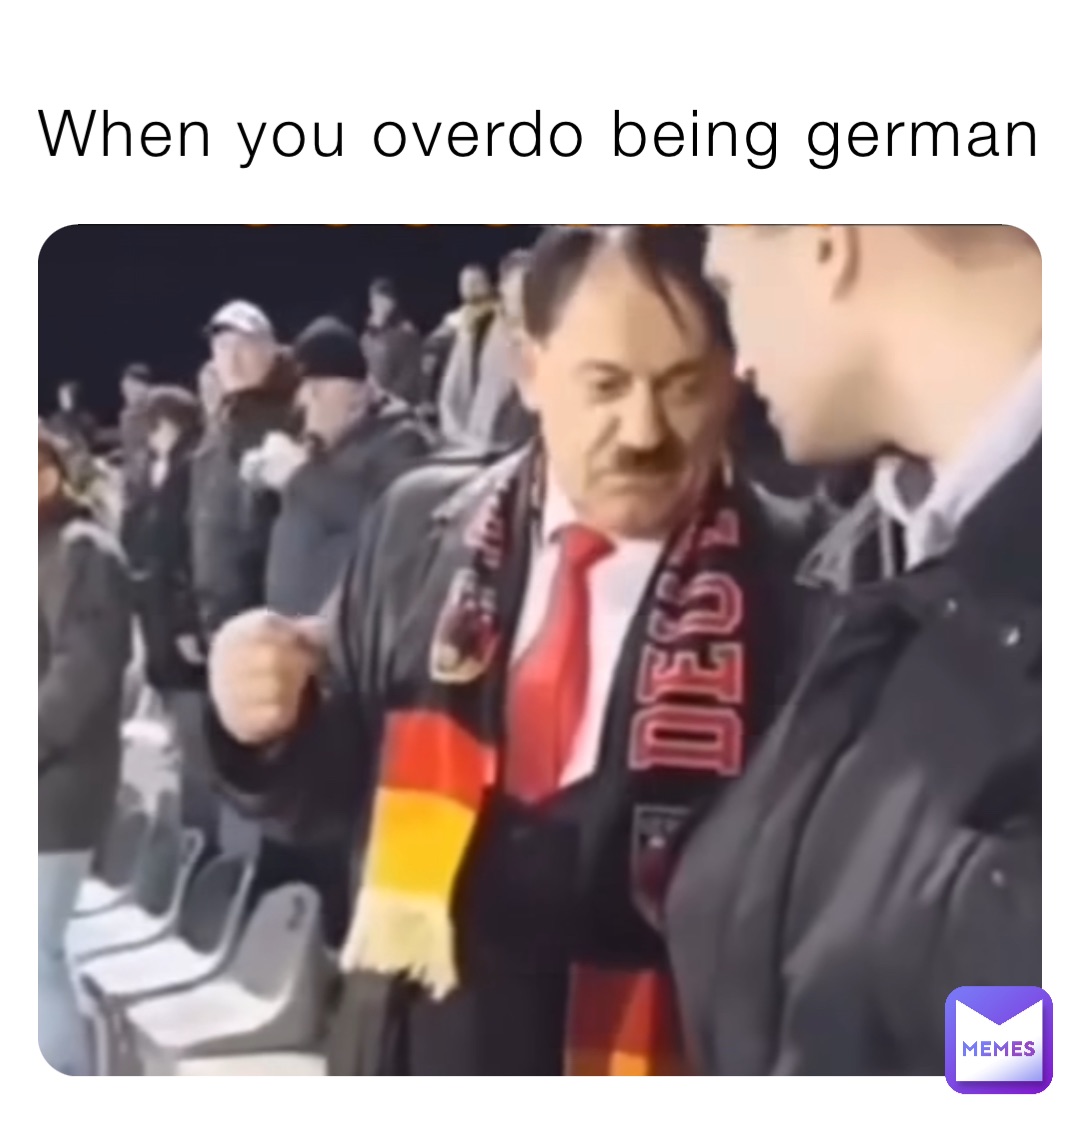 When you overdo being german